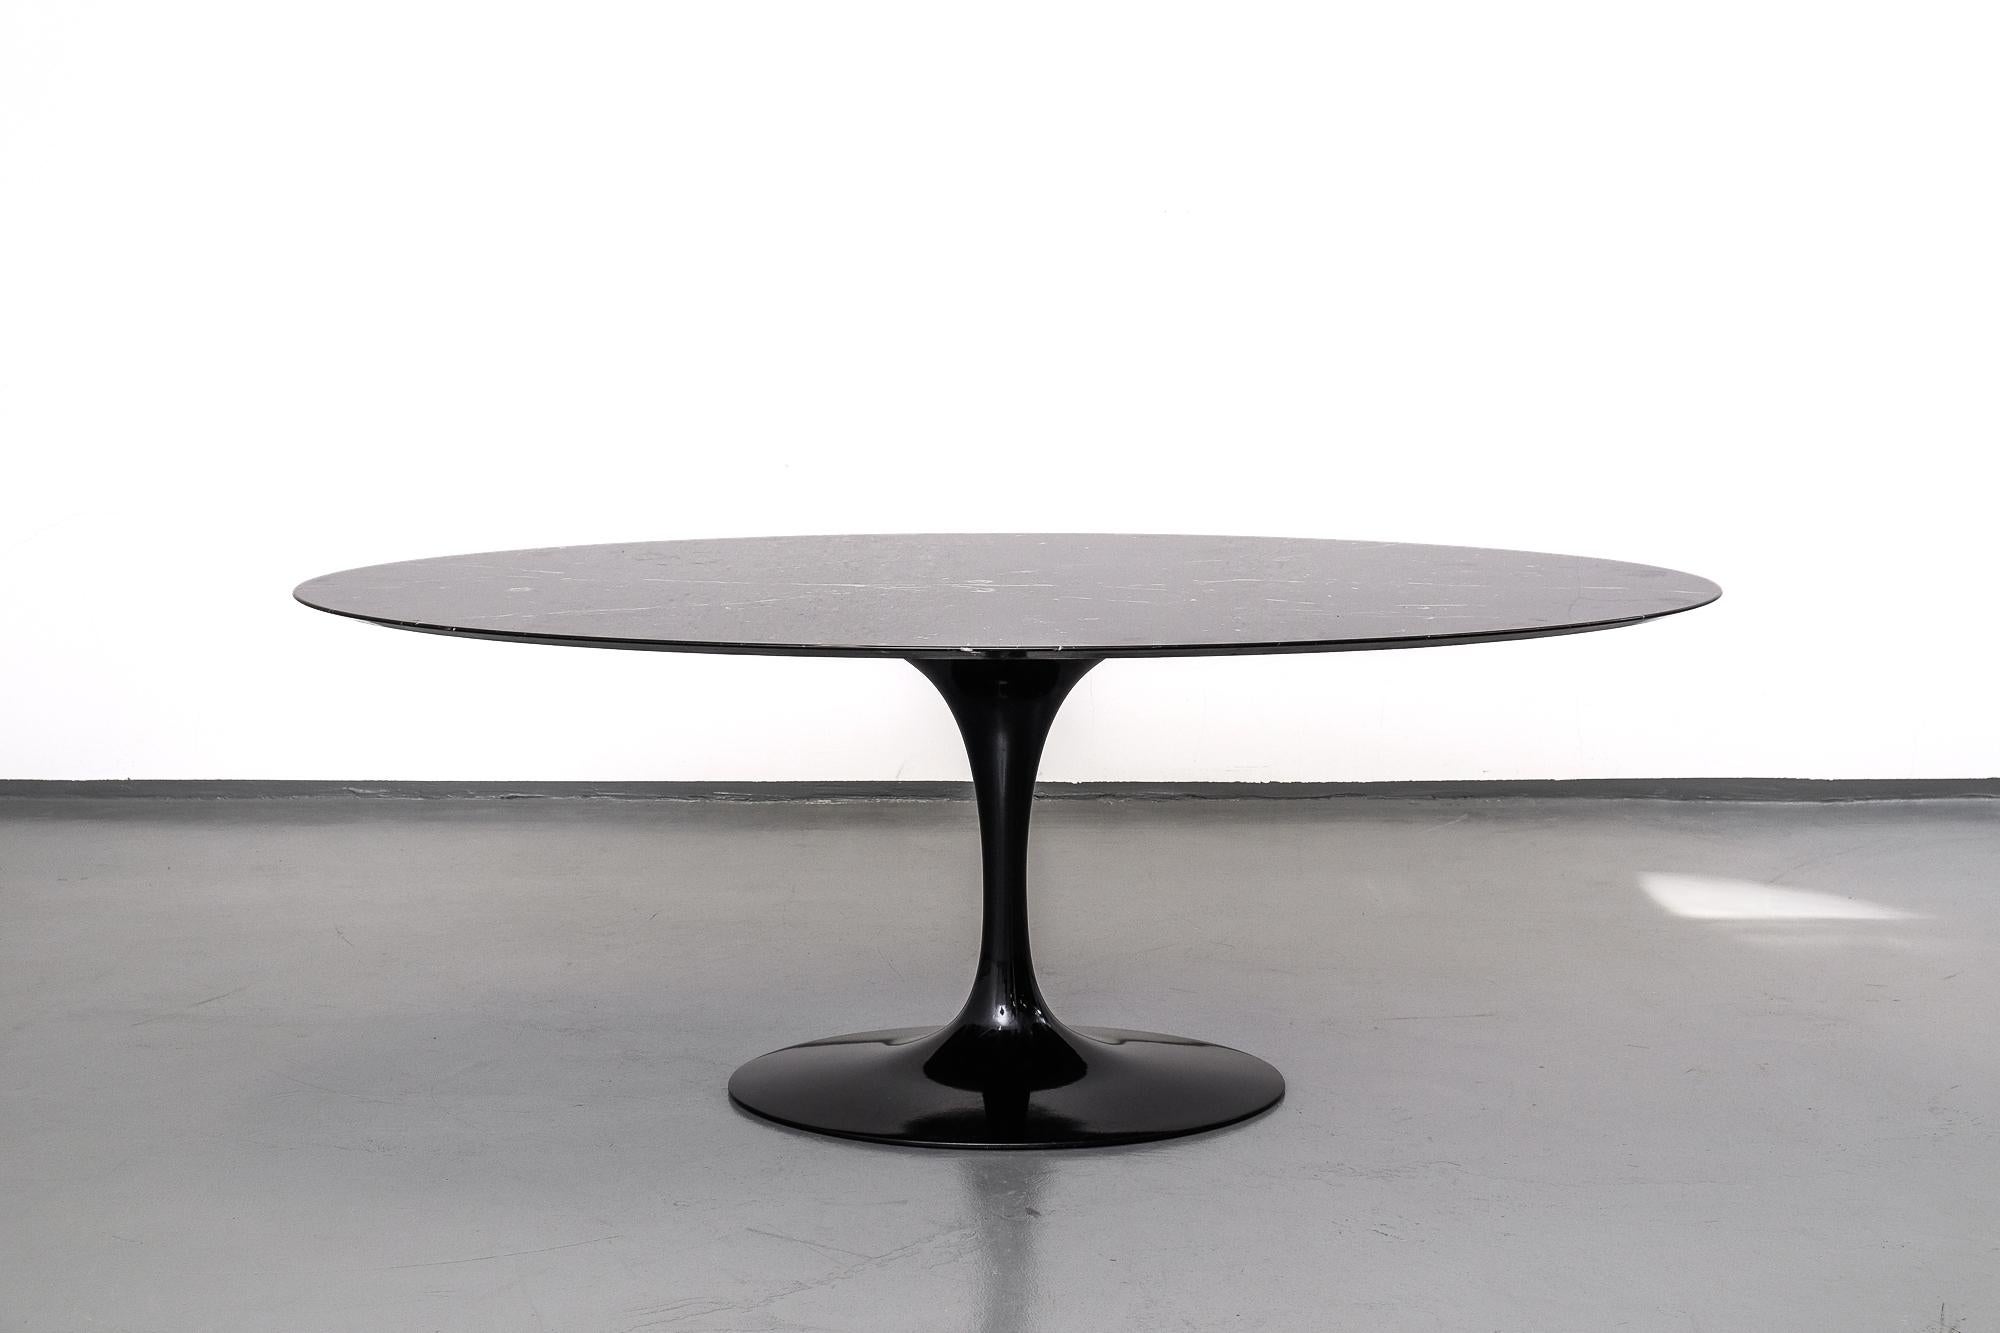 With the Pedestal collection designed in 1957, Eero Saarinen resolved the 